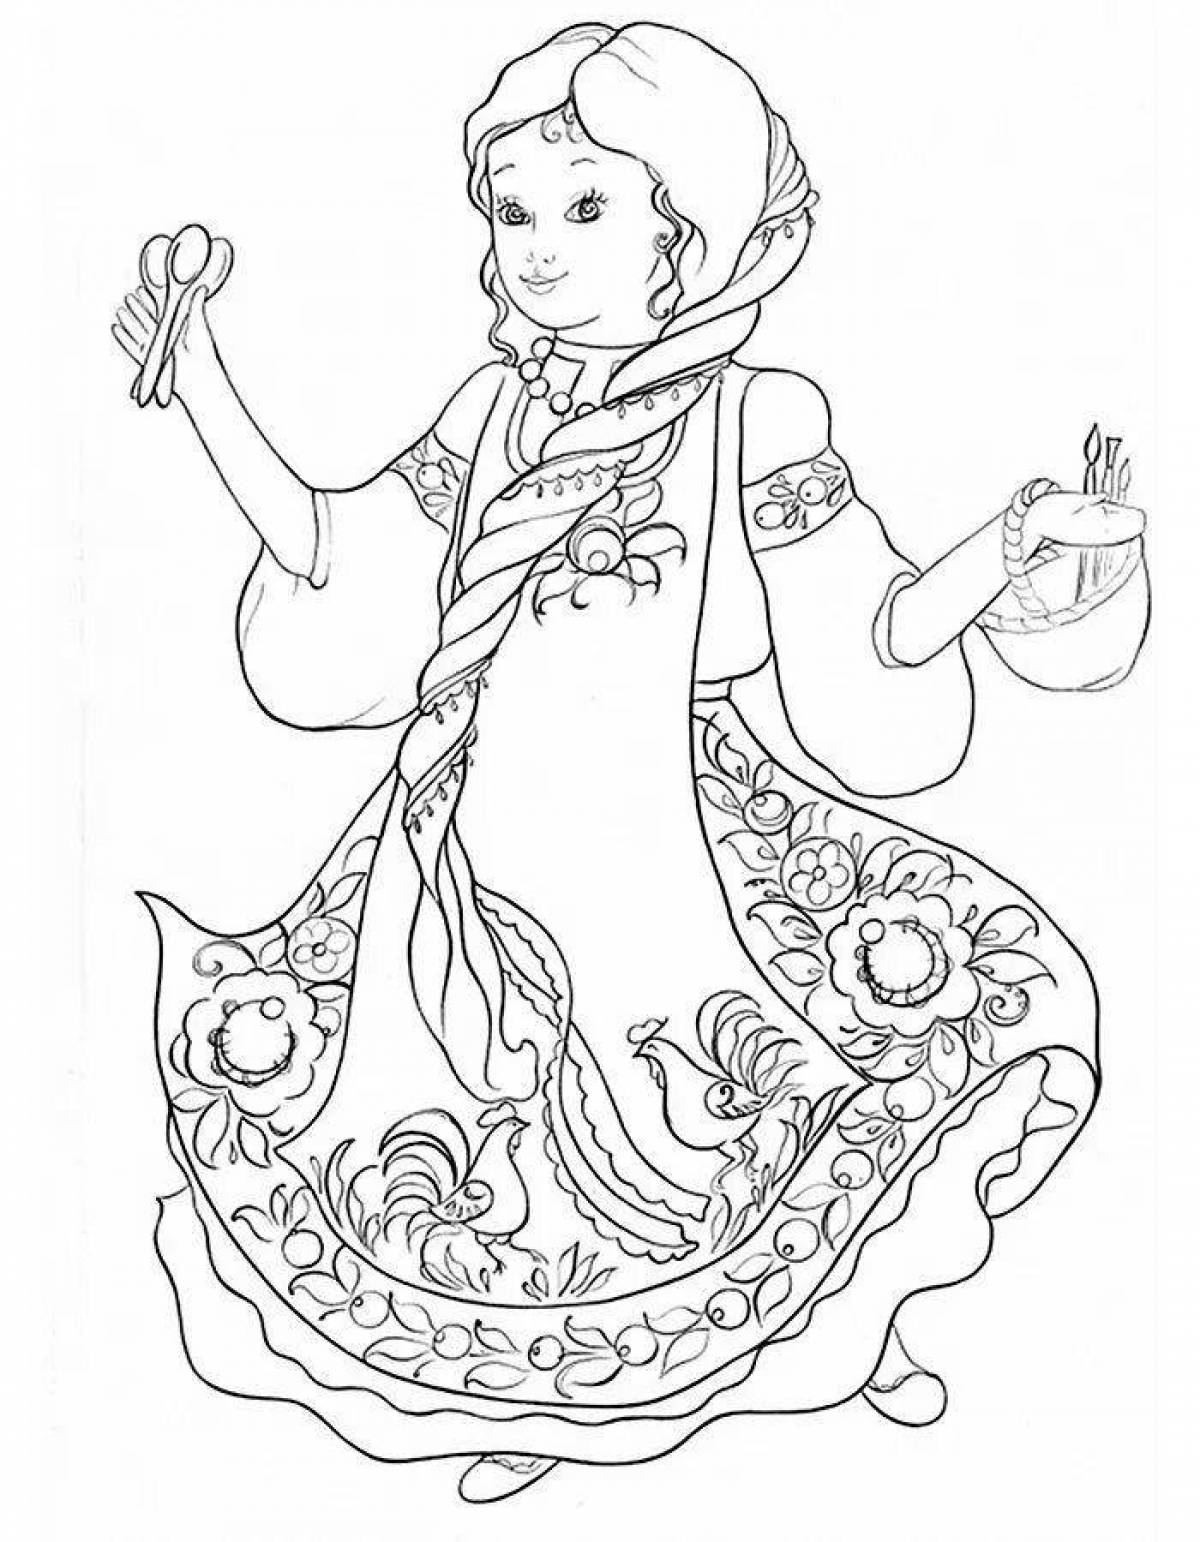 Fairytale coloring book based on Bazhov's fairy tales